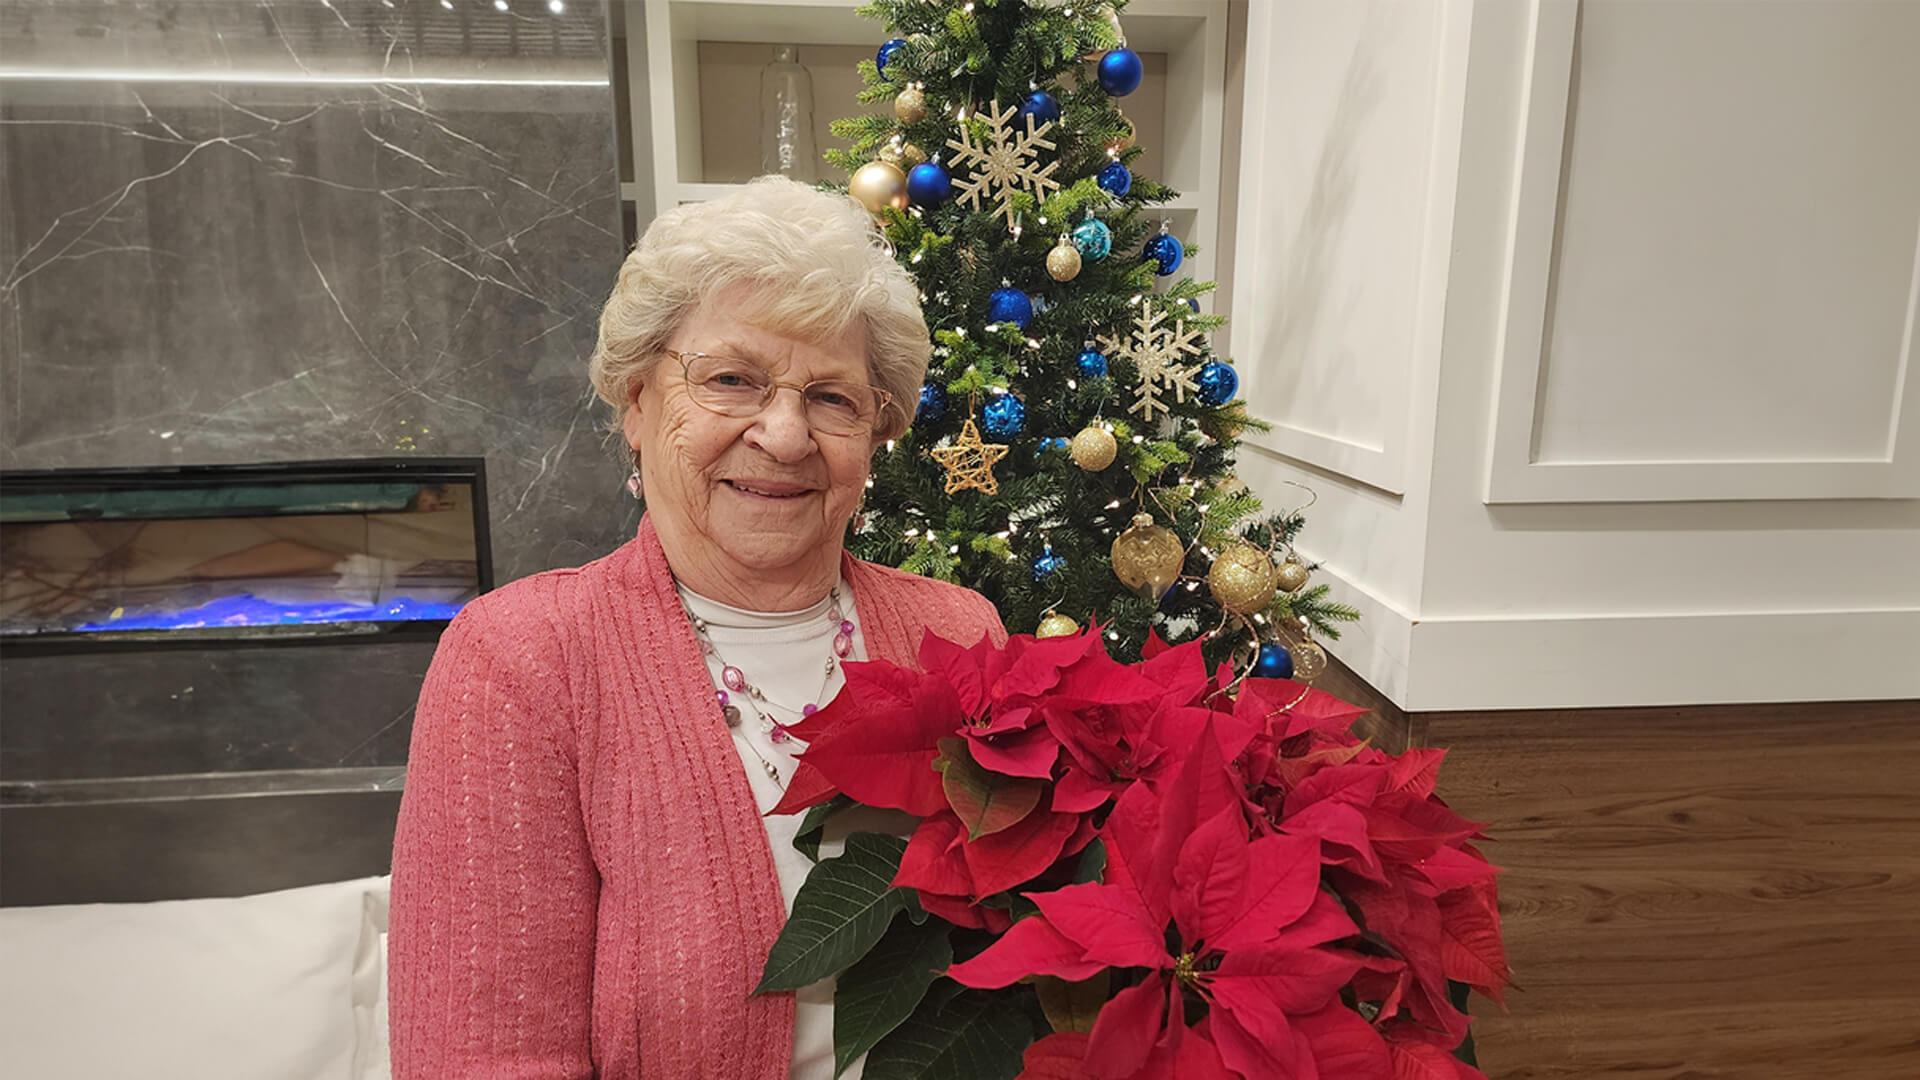 Female senior holding Poinsettia in front of a Christmas tree